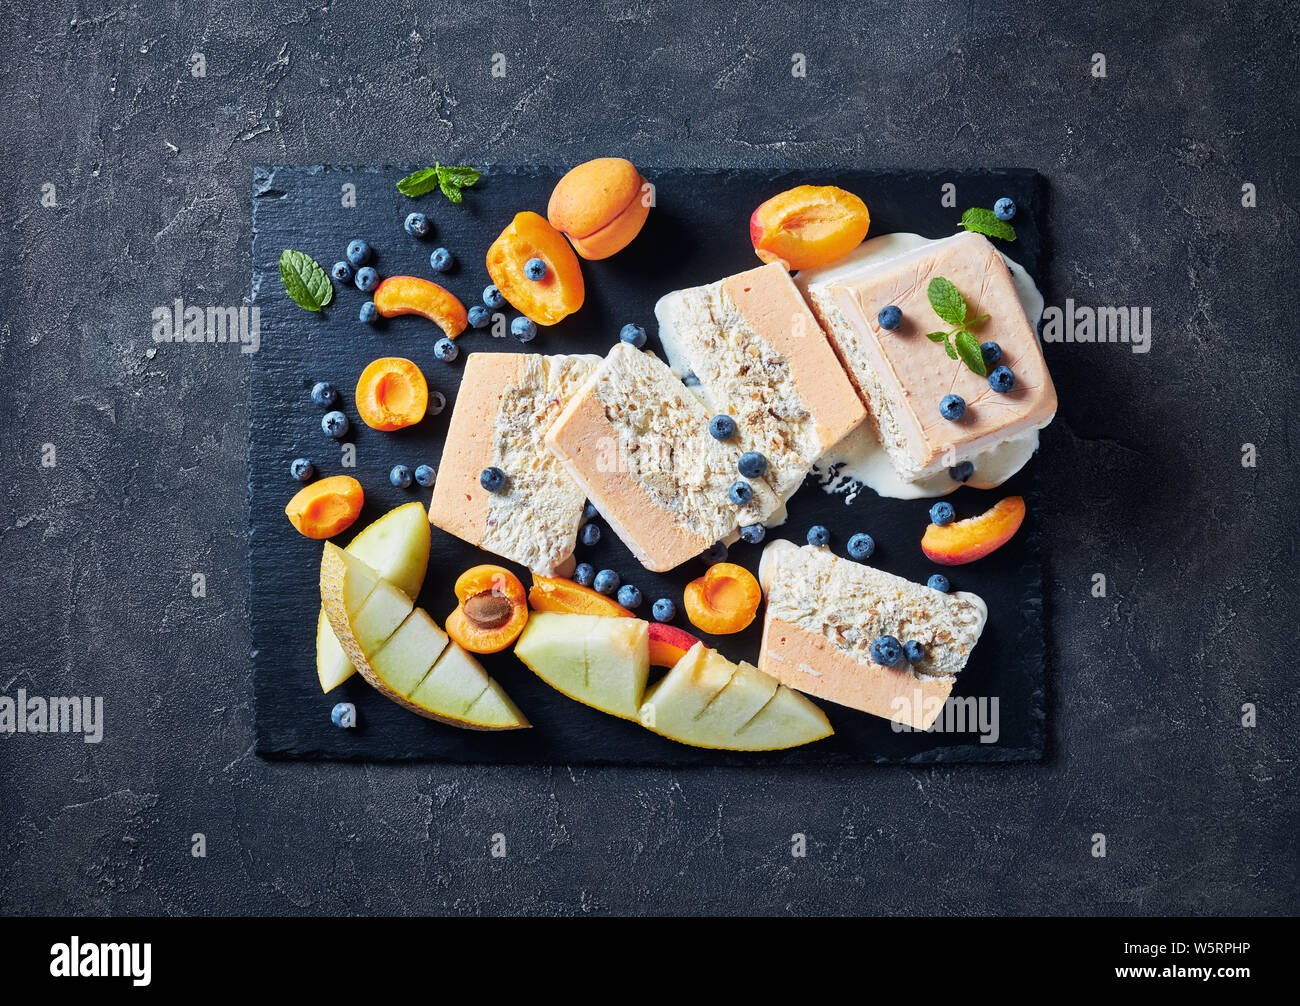 close-up of melting Semifreddo alle Mandorle, Sicilian Almond Semifreddo with apricot and melon sliced on a slate plate with fruits and berries, view Stock Photo